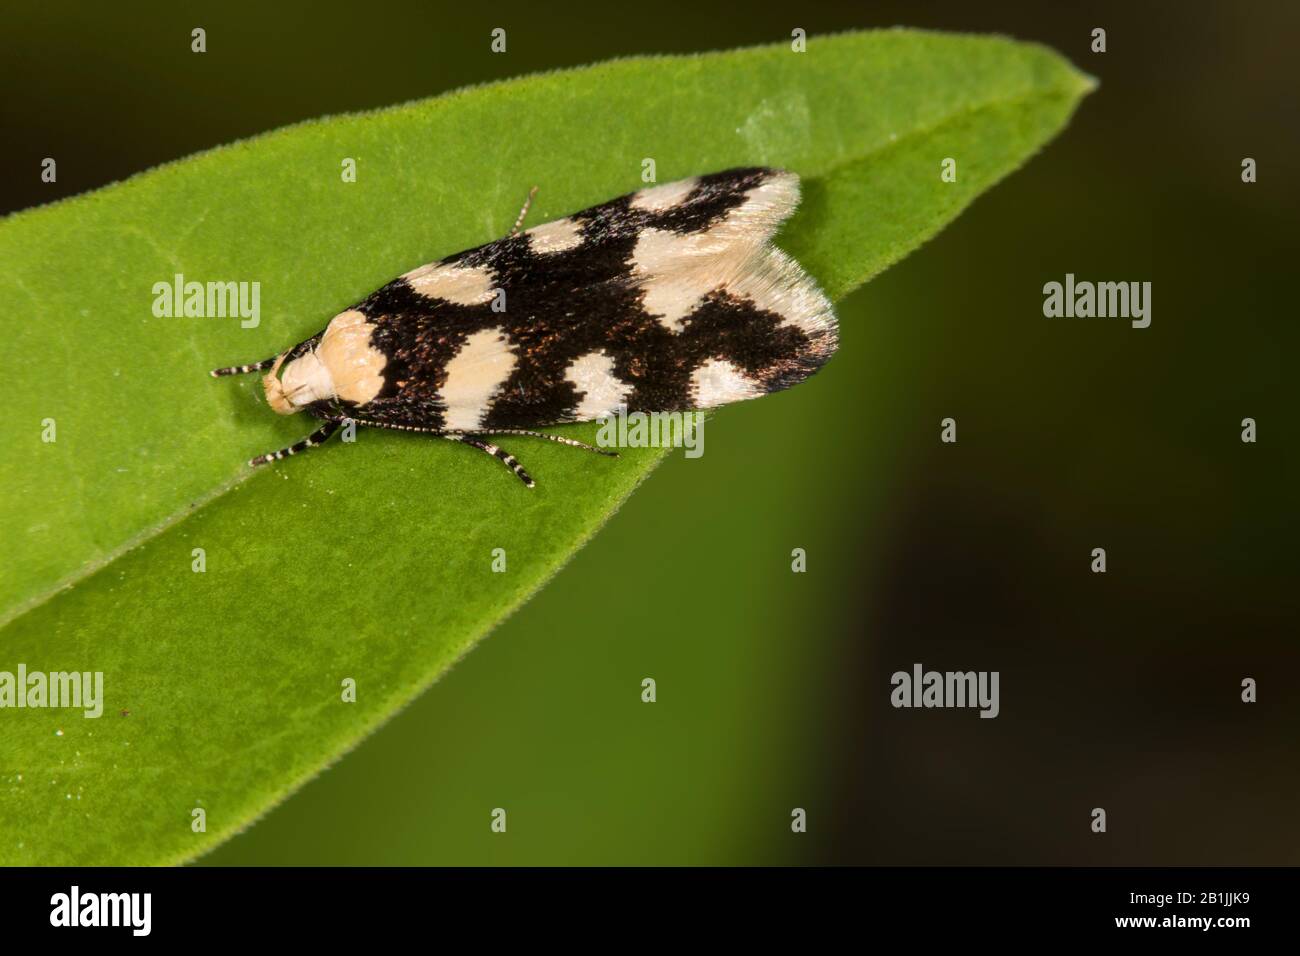 gelechioid moth (Pseudotelphusa tessella), sitting on a leaf, view from above, Germany Stock Photo